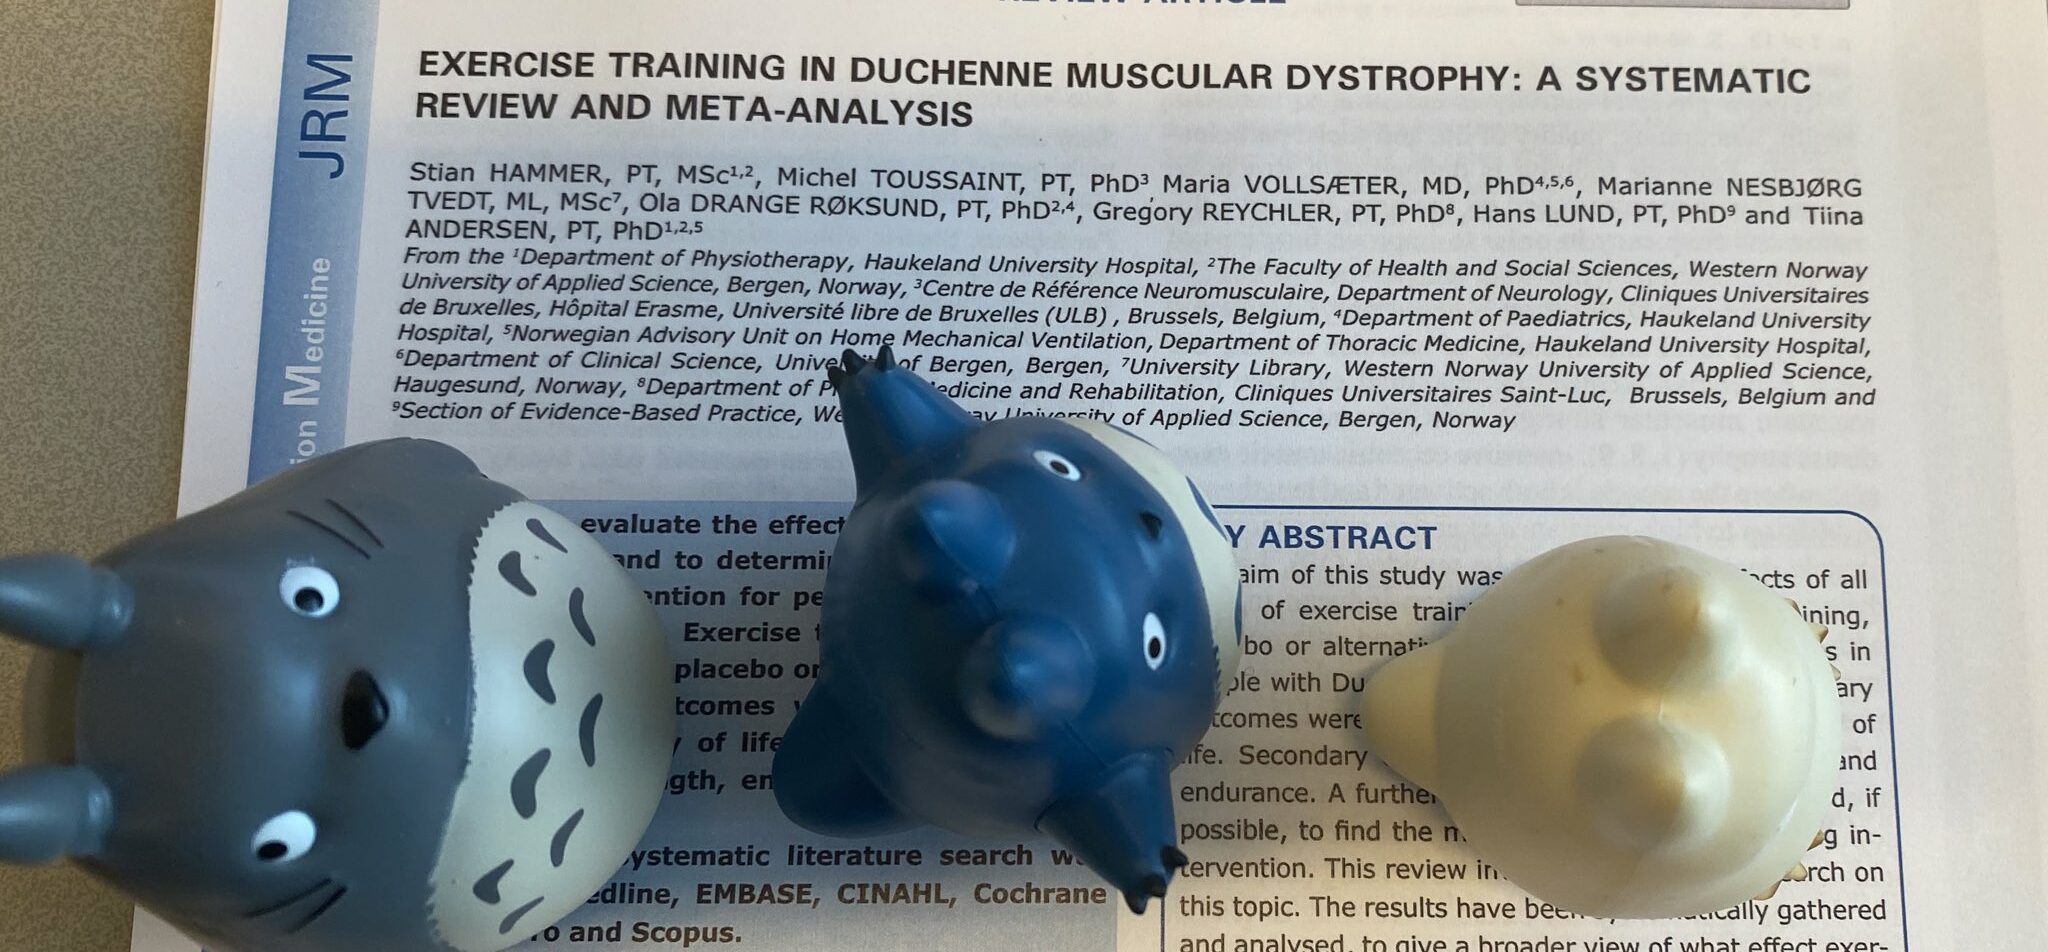 Exercise Training in Duchenne Muscular Dystrophy- A Systematic Review and Meta-Analysis